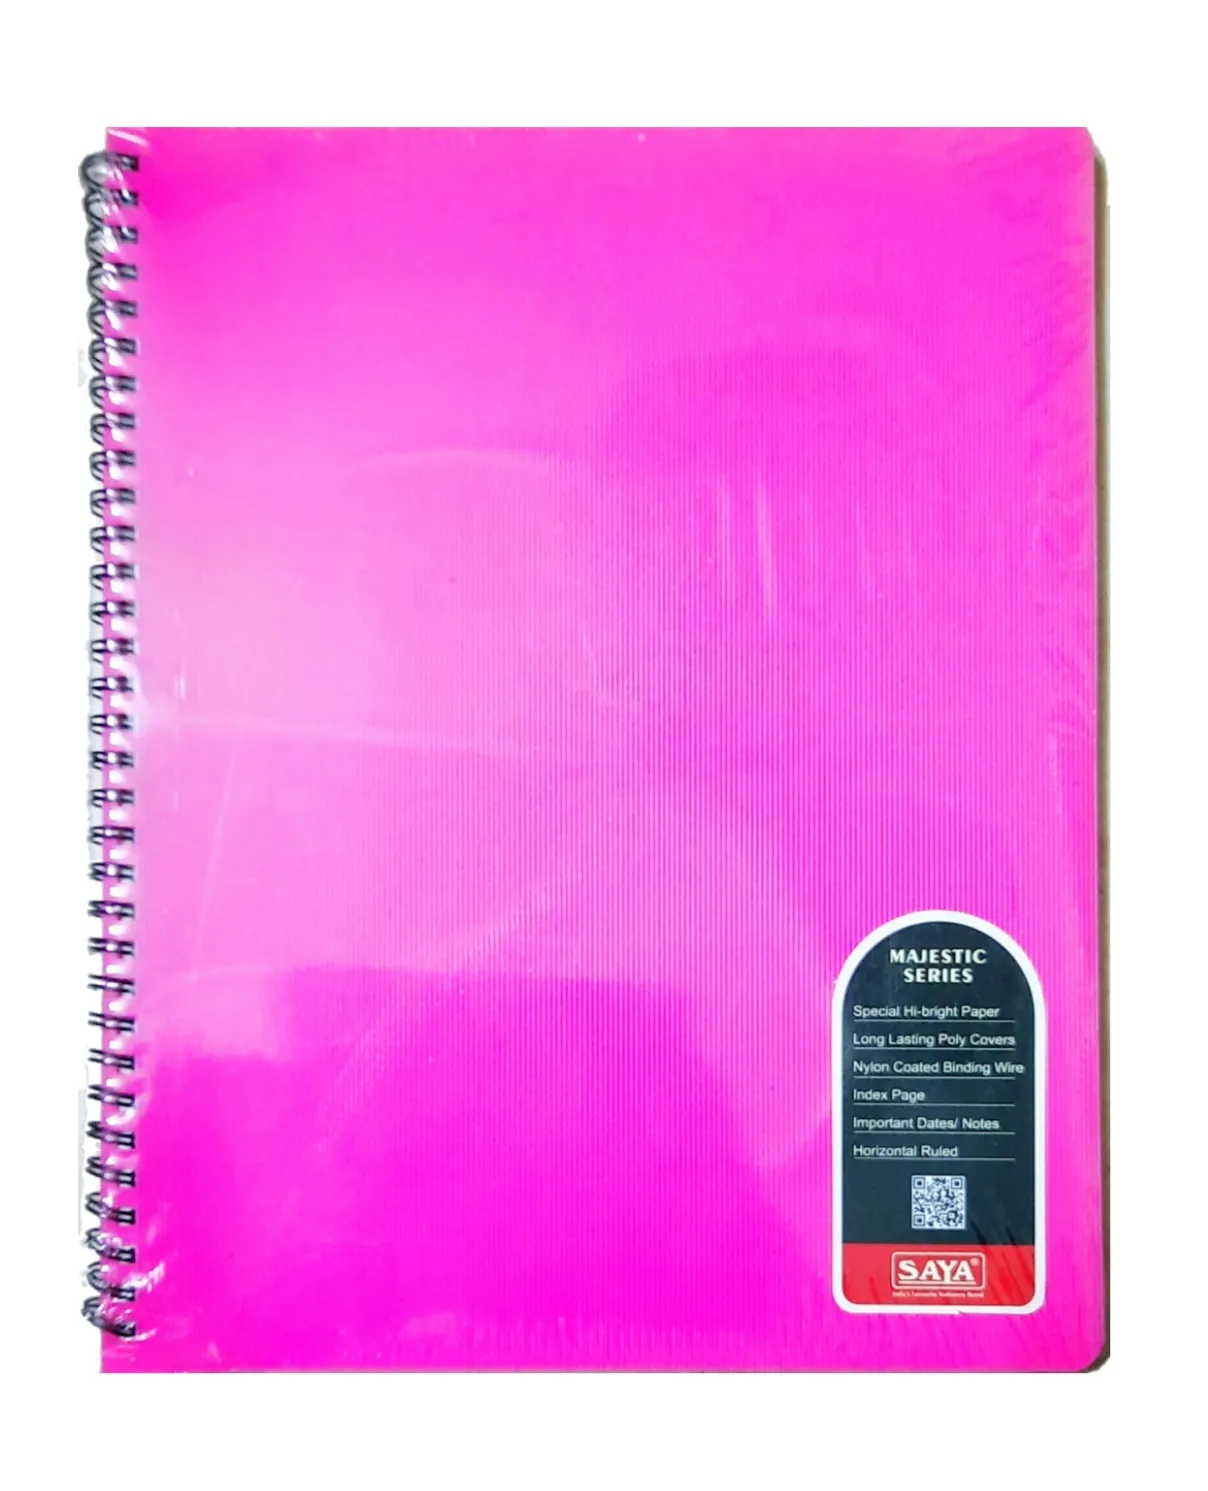 Saya Spiral Notebook, Majestic Series, Single Line, 160 Pages, 27.9 X 21.6 cm, Pack of 1